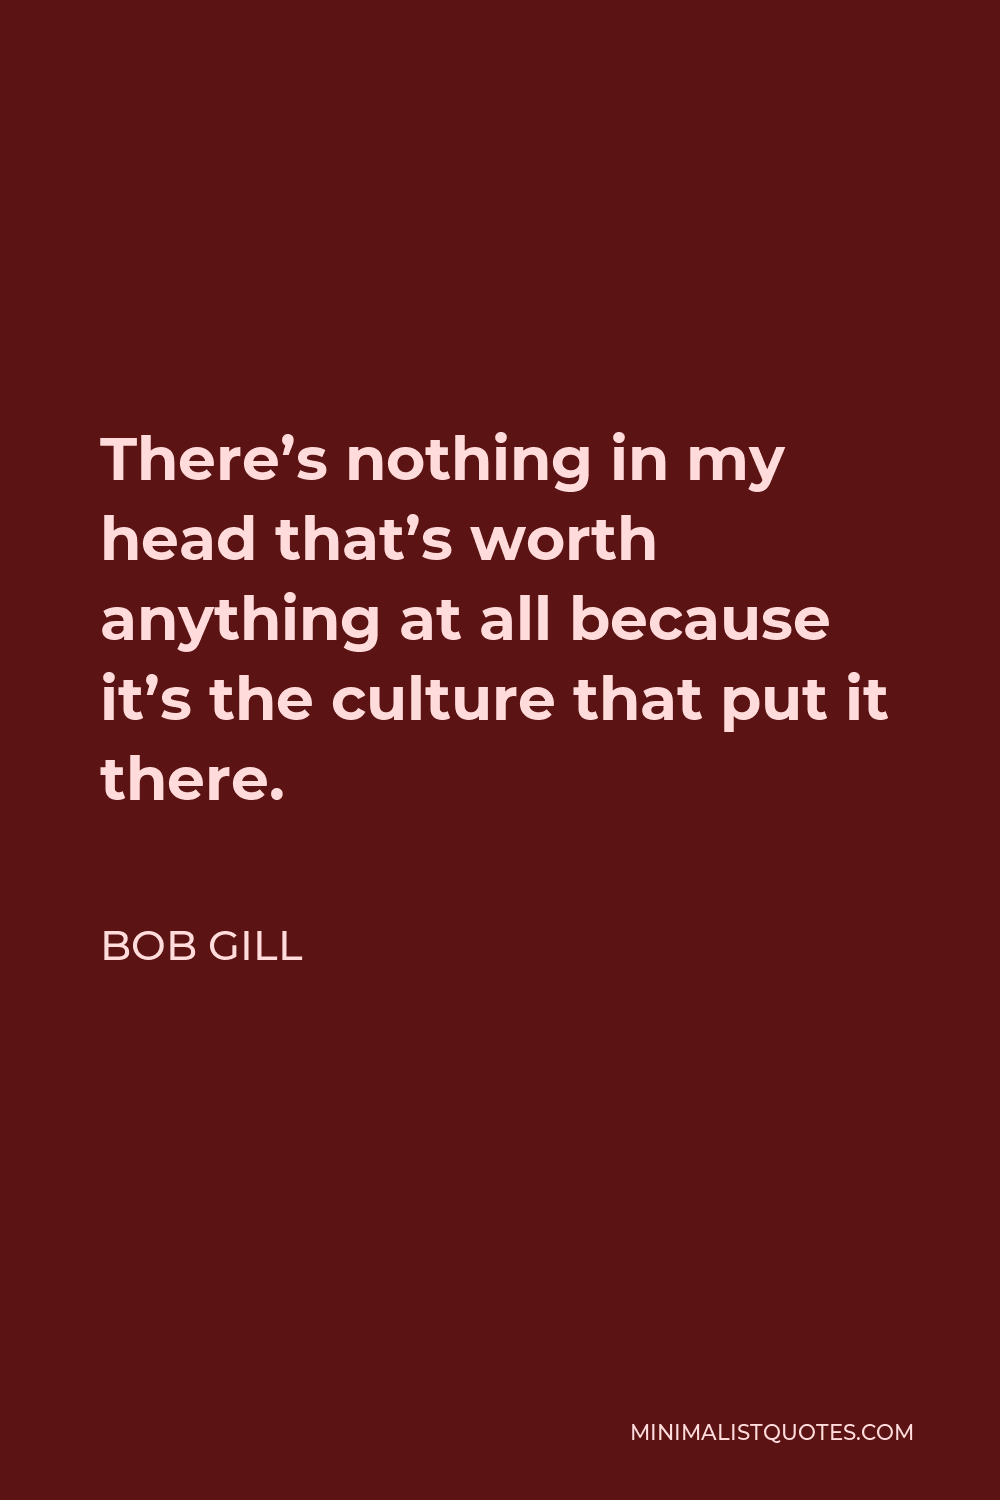 Bob Gill Quote - There’s nothing in my head that’s worth anything at all because it’s the culture that put it there.